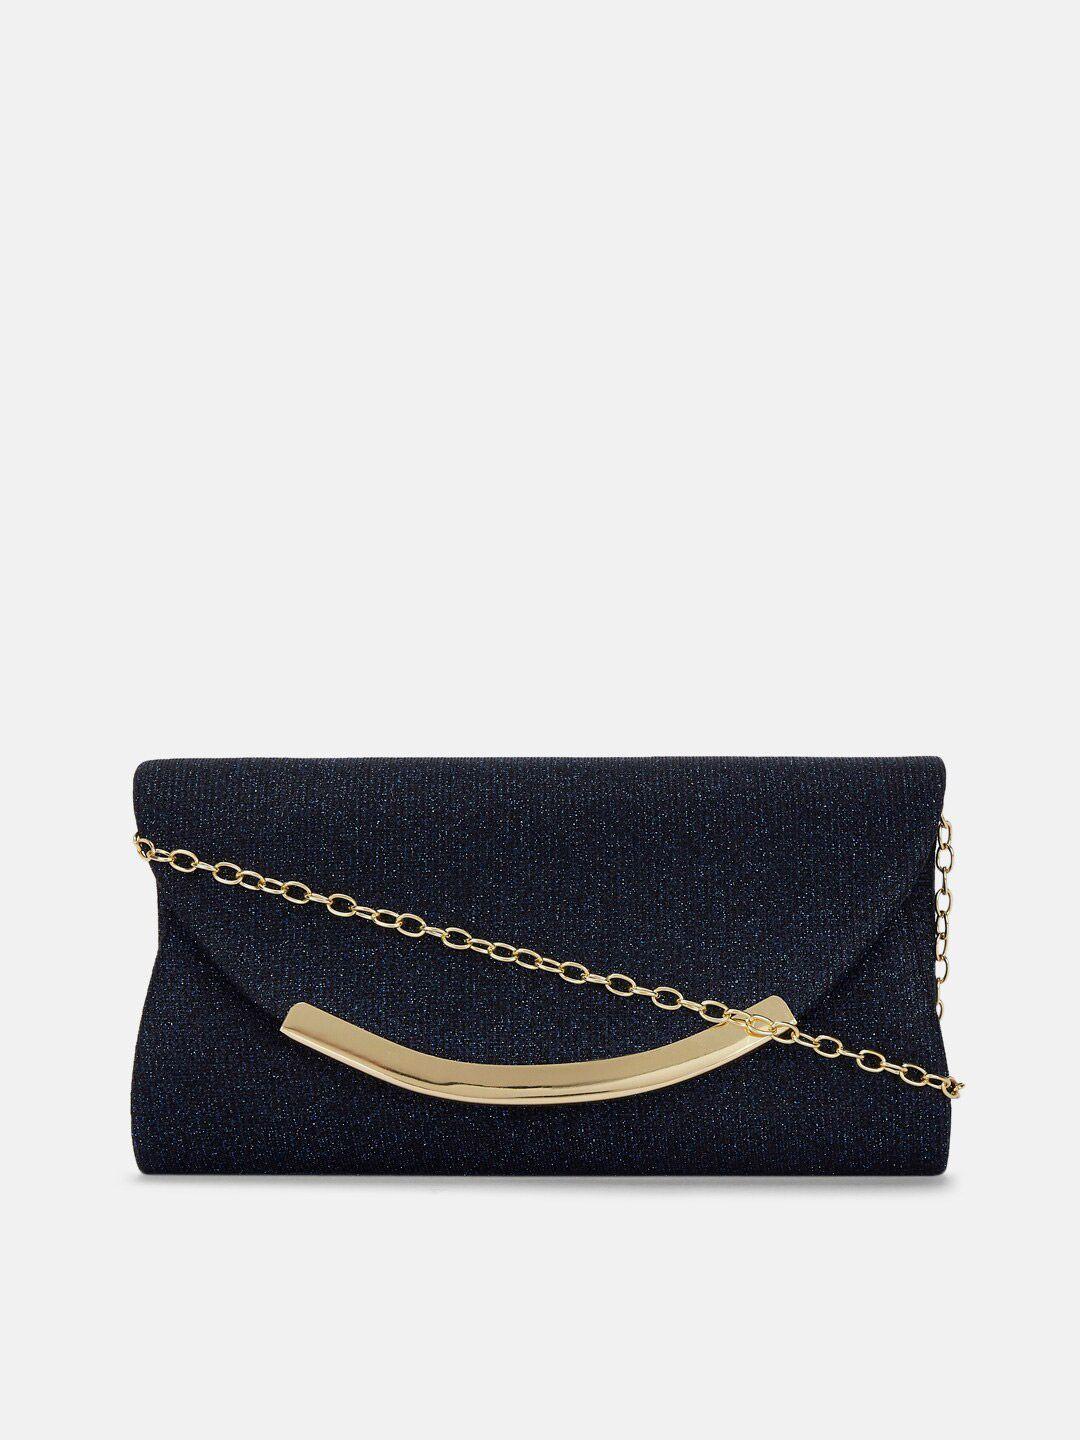 forever glam by pantaloons navy blue & gold-toned box clutch